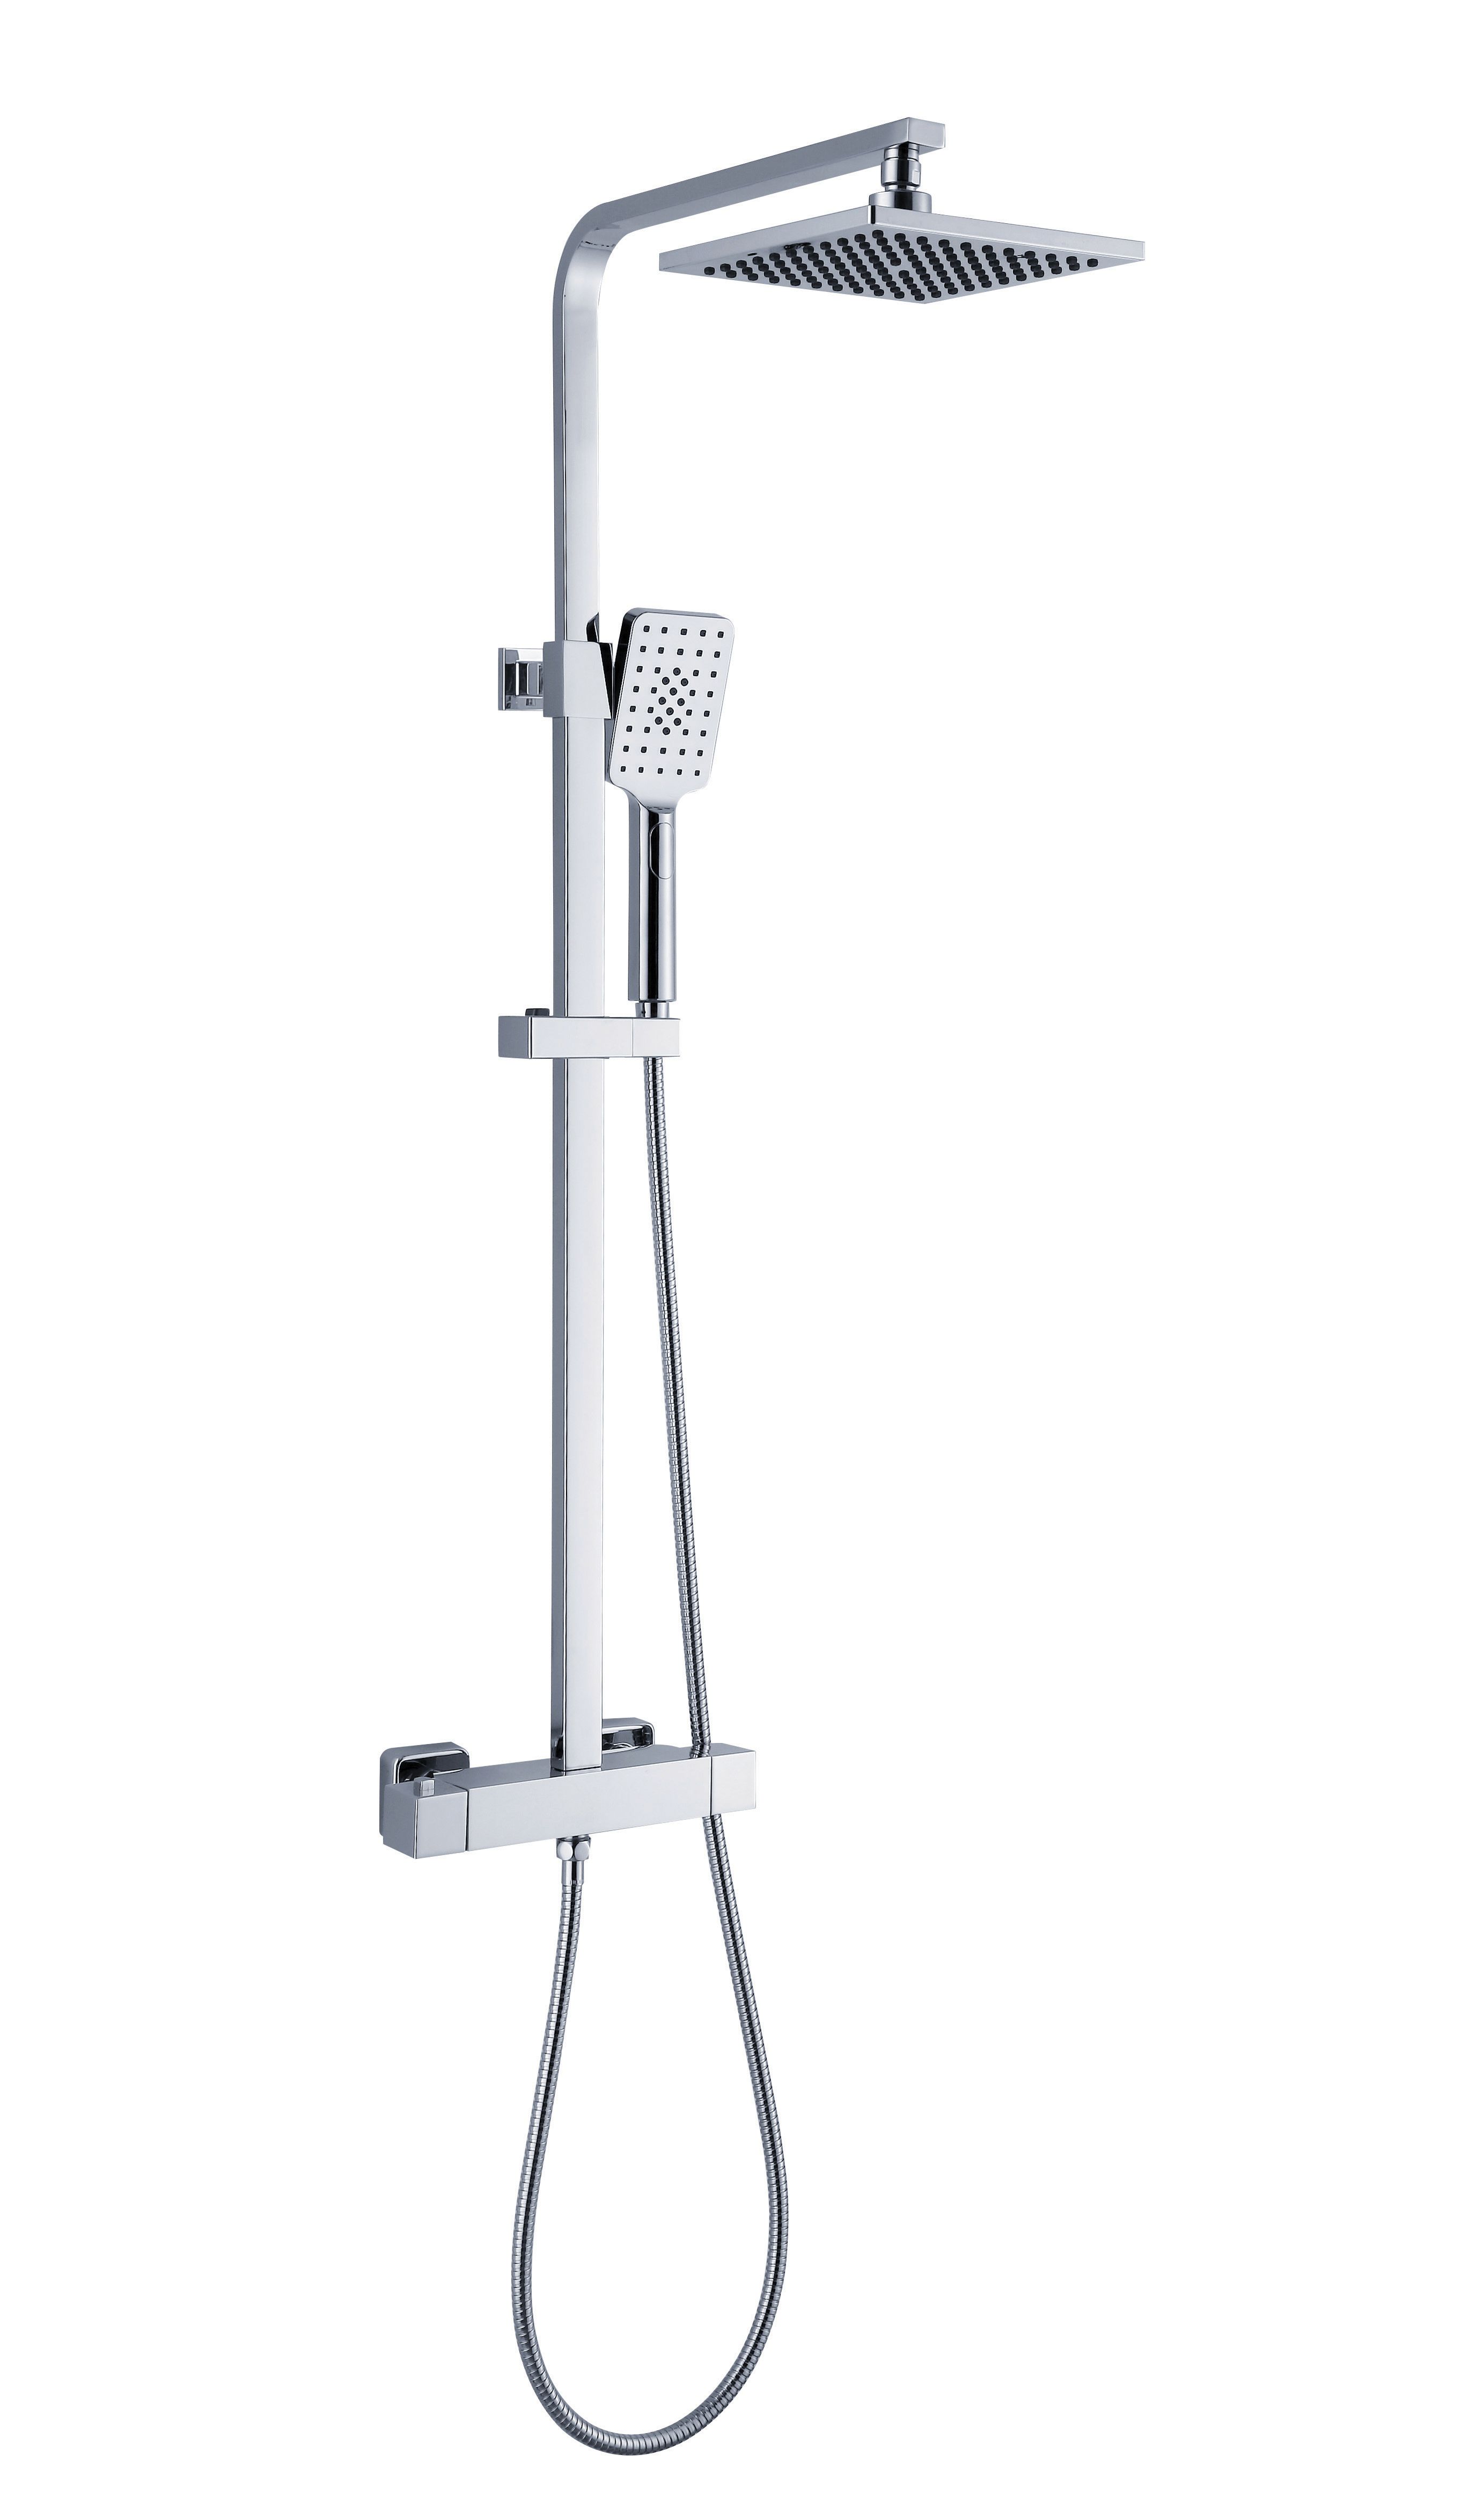 Image of Wickes Supreme Thermostatic Mixer Shower - Chrome